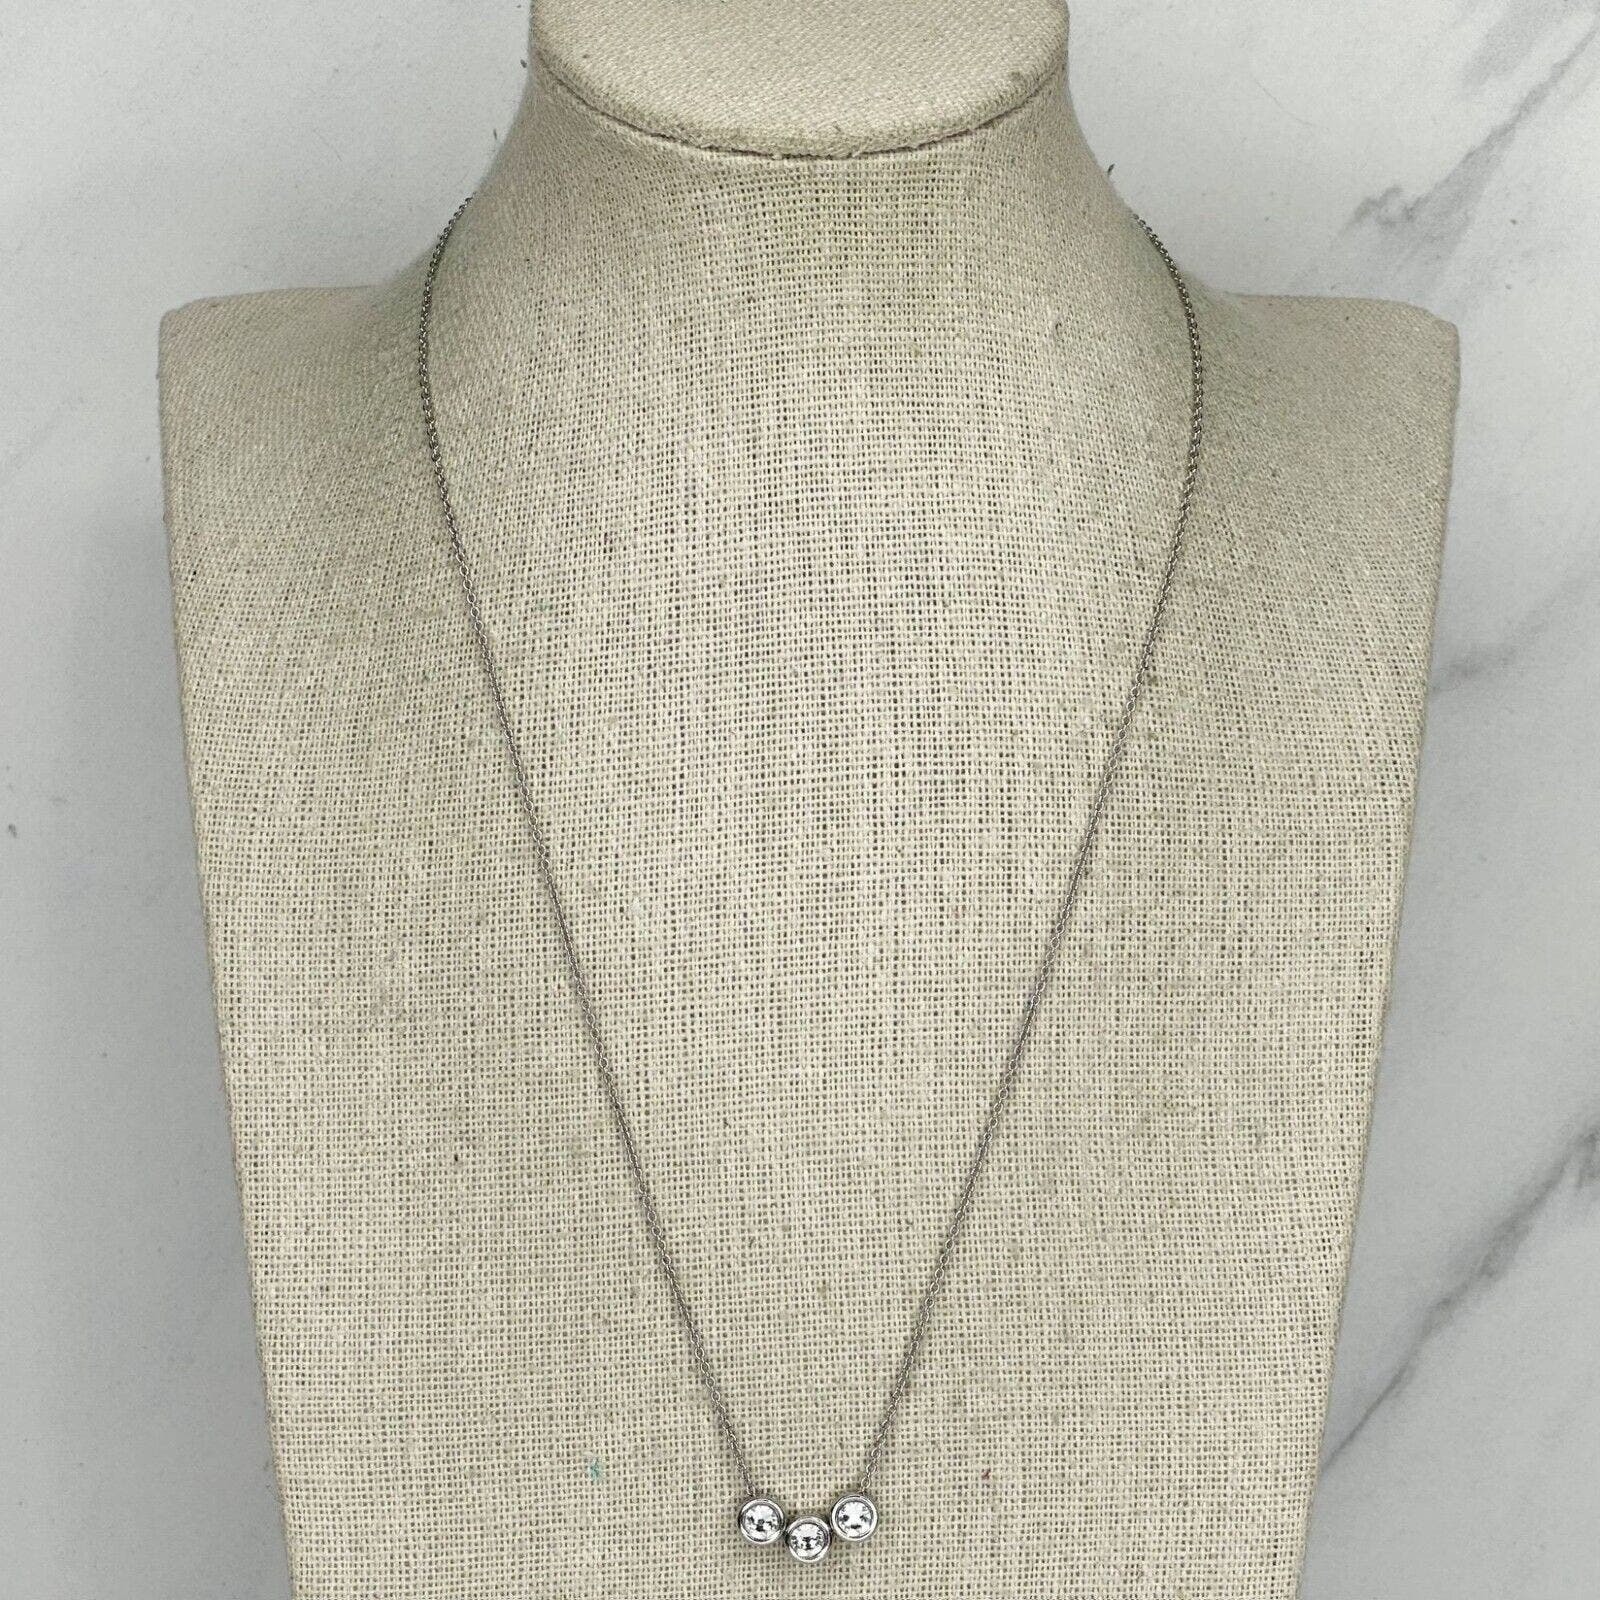 Primary image for Chico's Silver Tone 3 Rhinestone Slide Chain Link Necklace